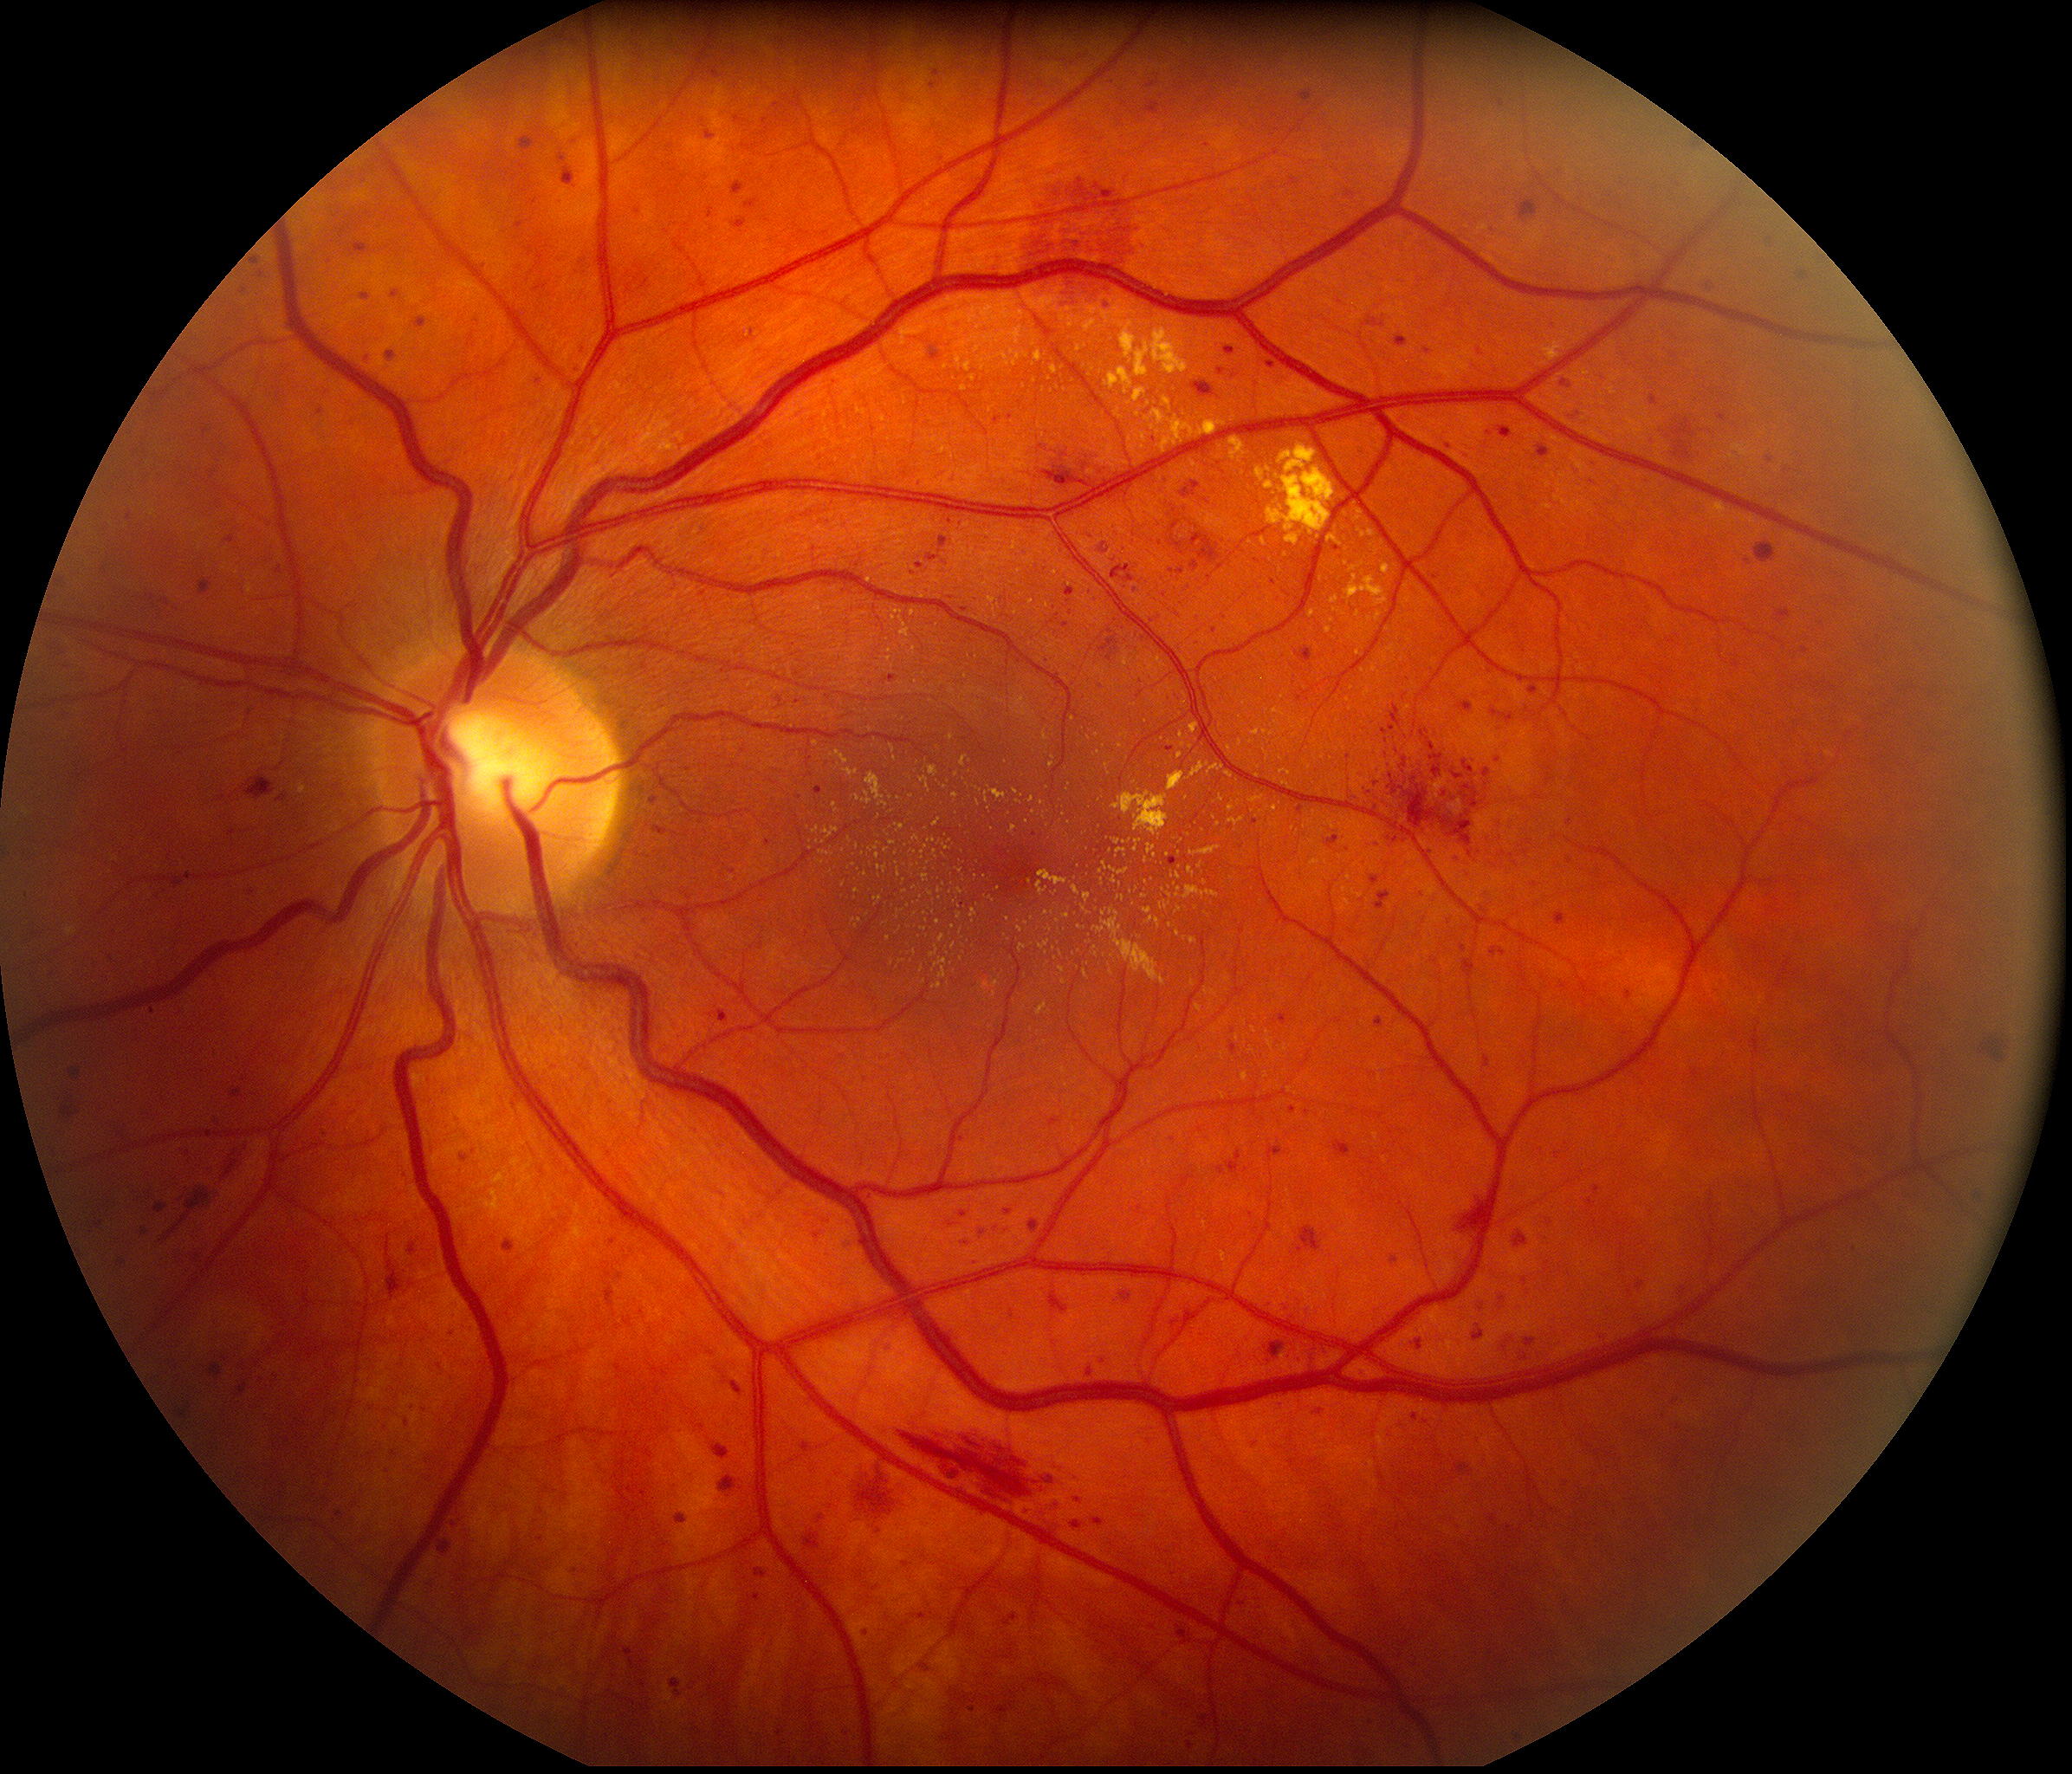 About diabetic retinopathy | Carver College of Medicine